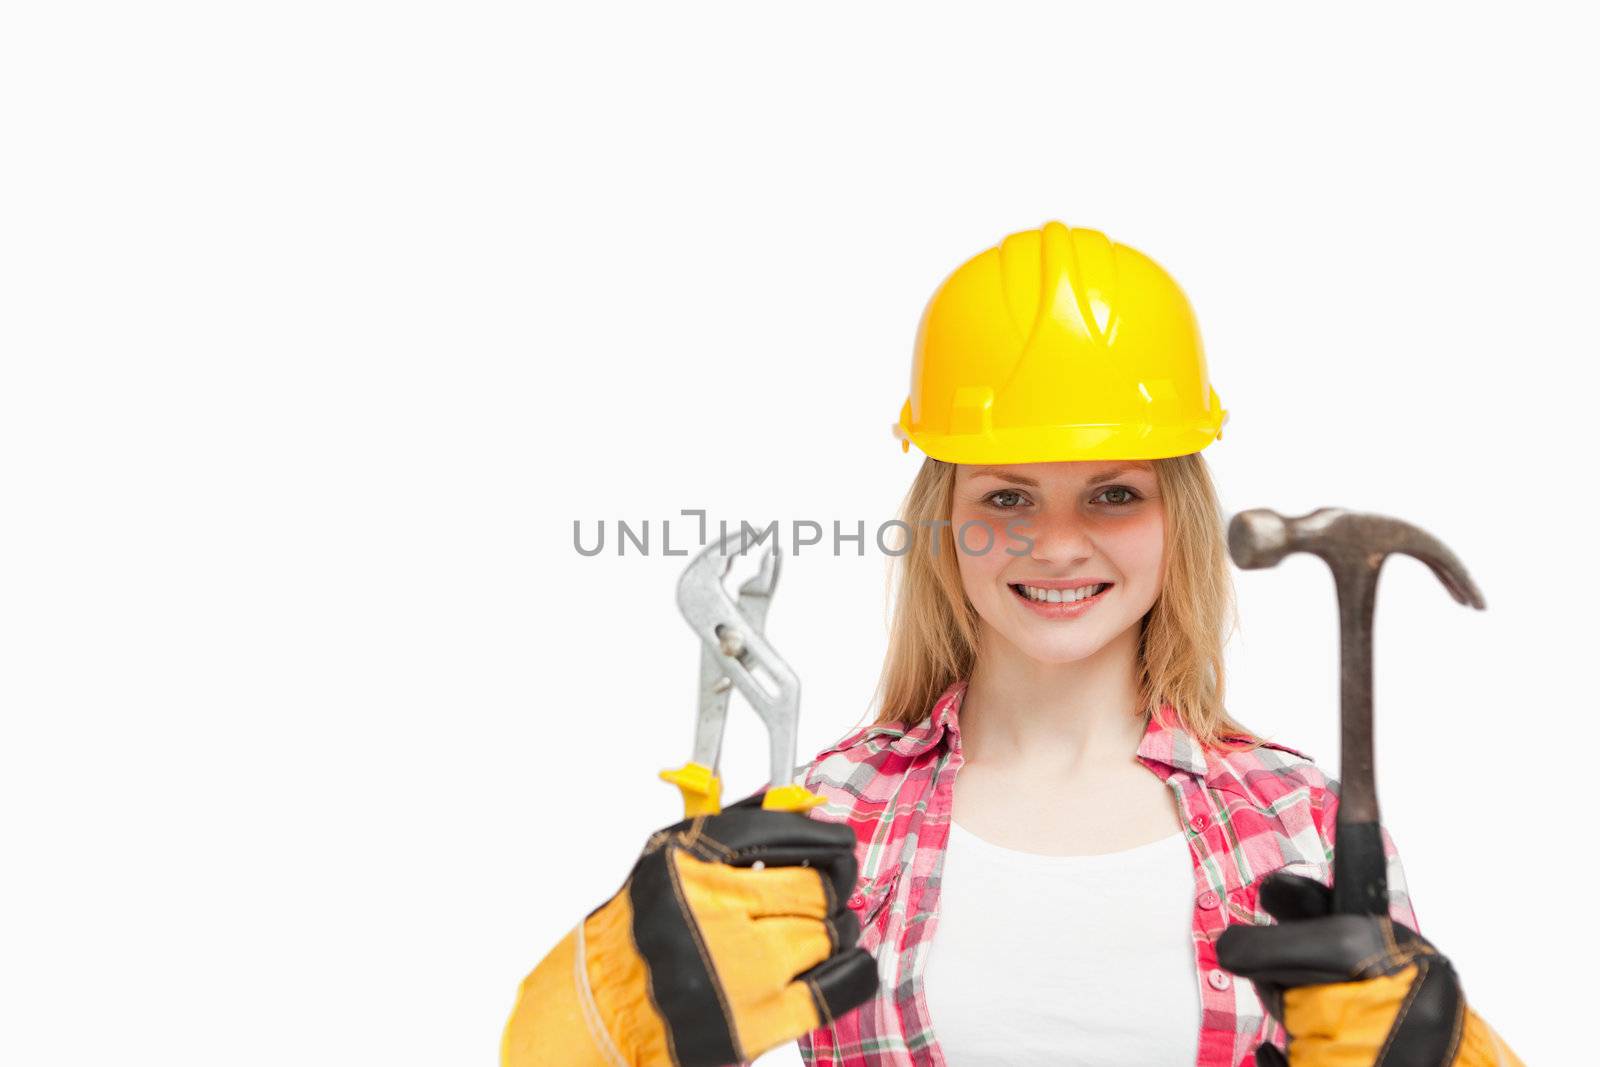 Woman smiling while wearing a safety helmet against white background